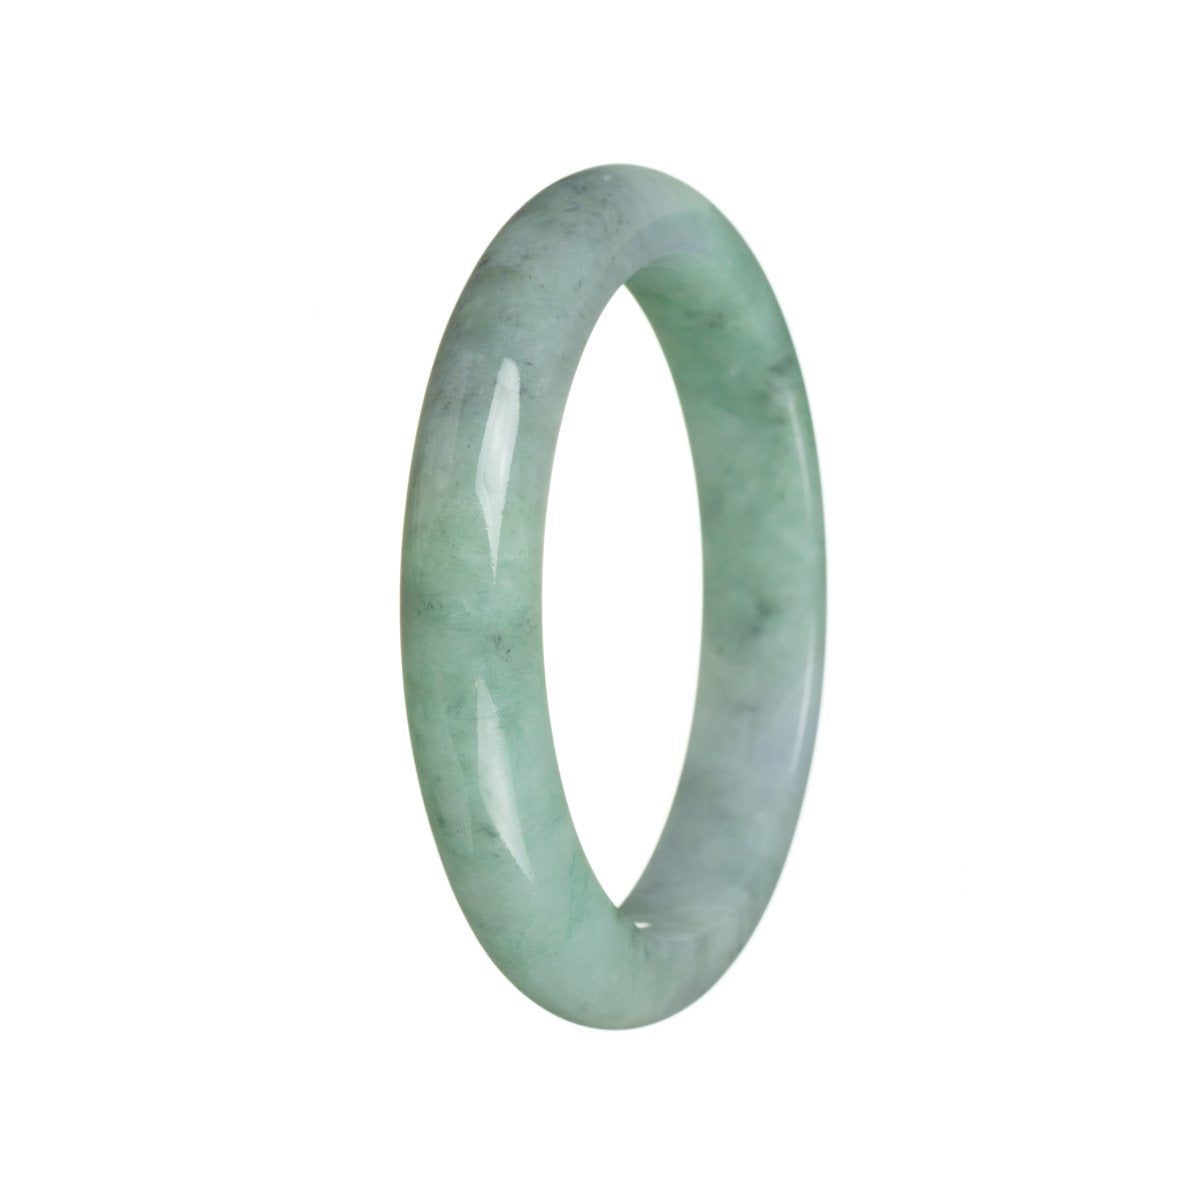 Alt text: A stunning 60mm semi-round, authentic Type A Apple green Burmese Jade Bracelet from MAYS.